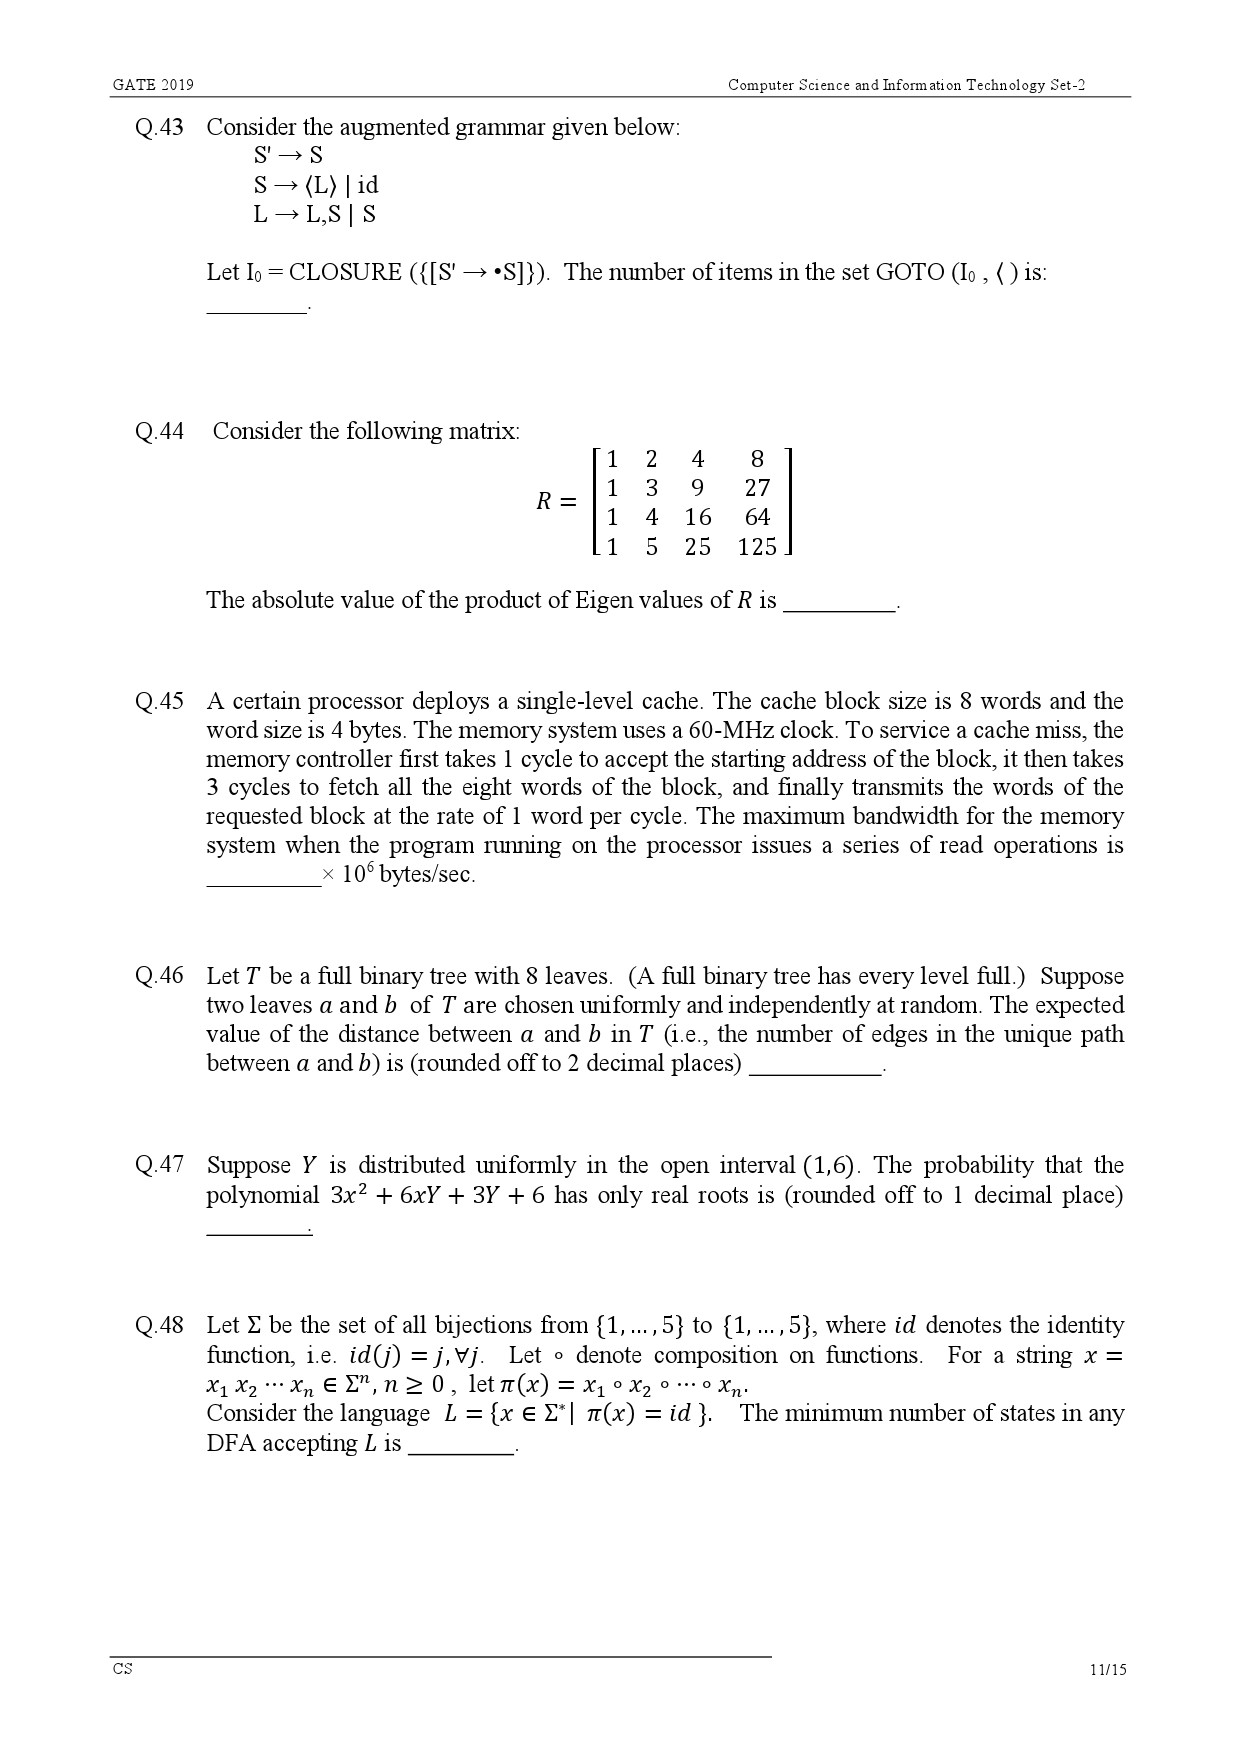 GATE Exam Question Paper 2019 Computer Science and Information Technology 14